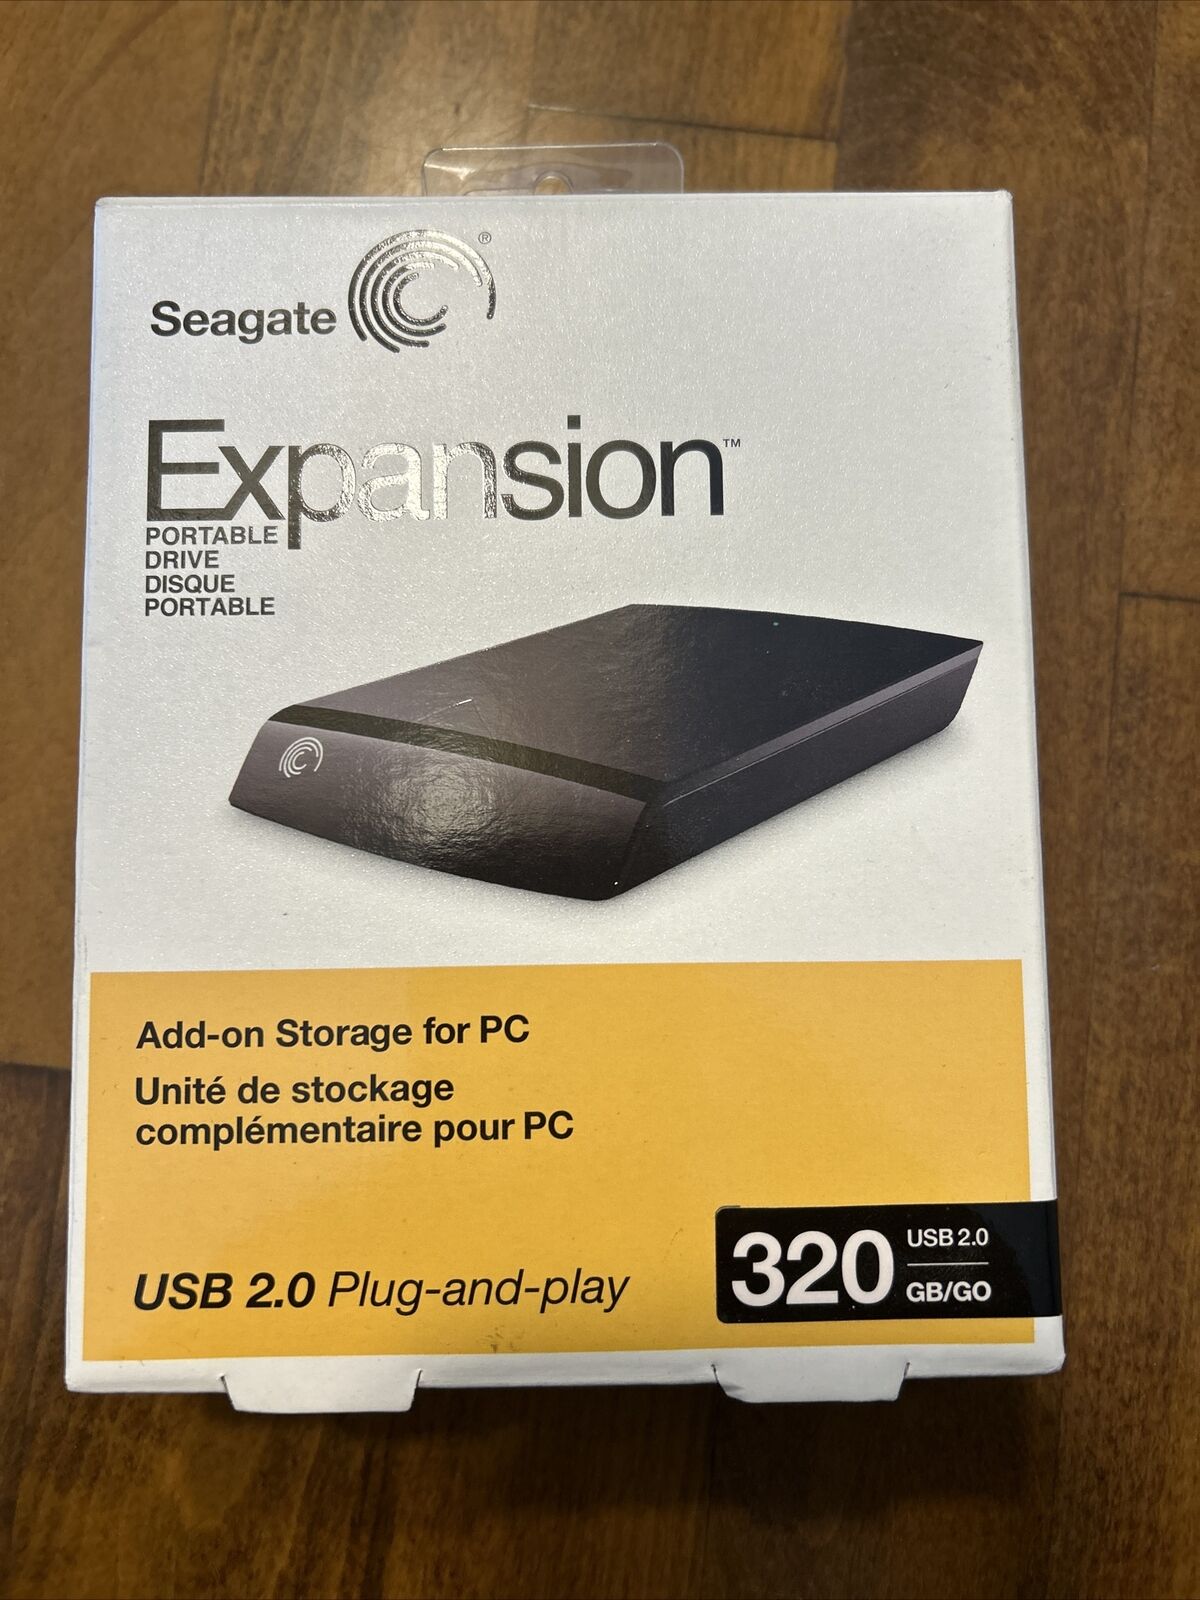 Seagate Expansion 320 GB,External,5400 RPM (EXPANSION 320GB) Hard Drive